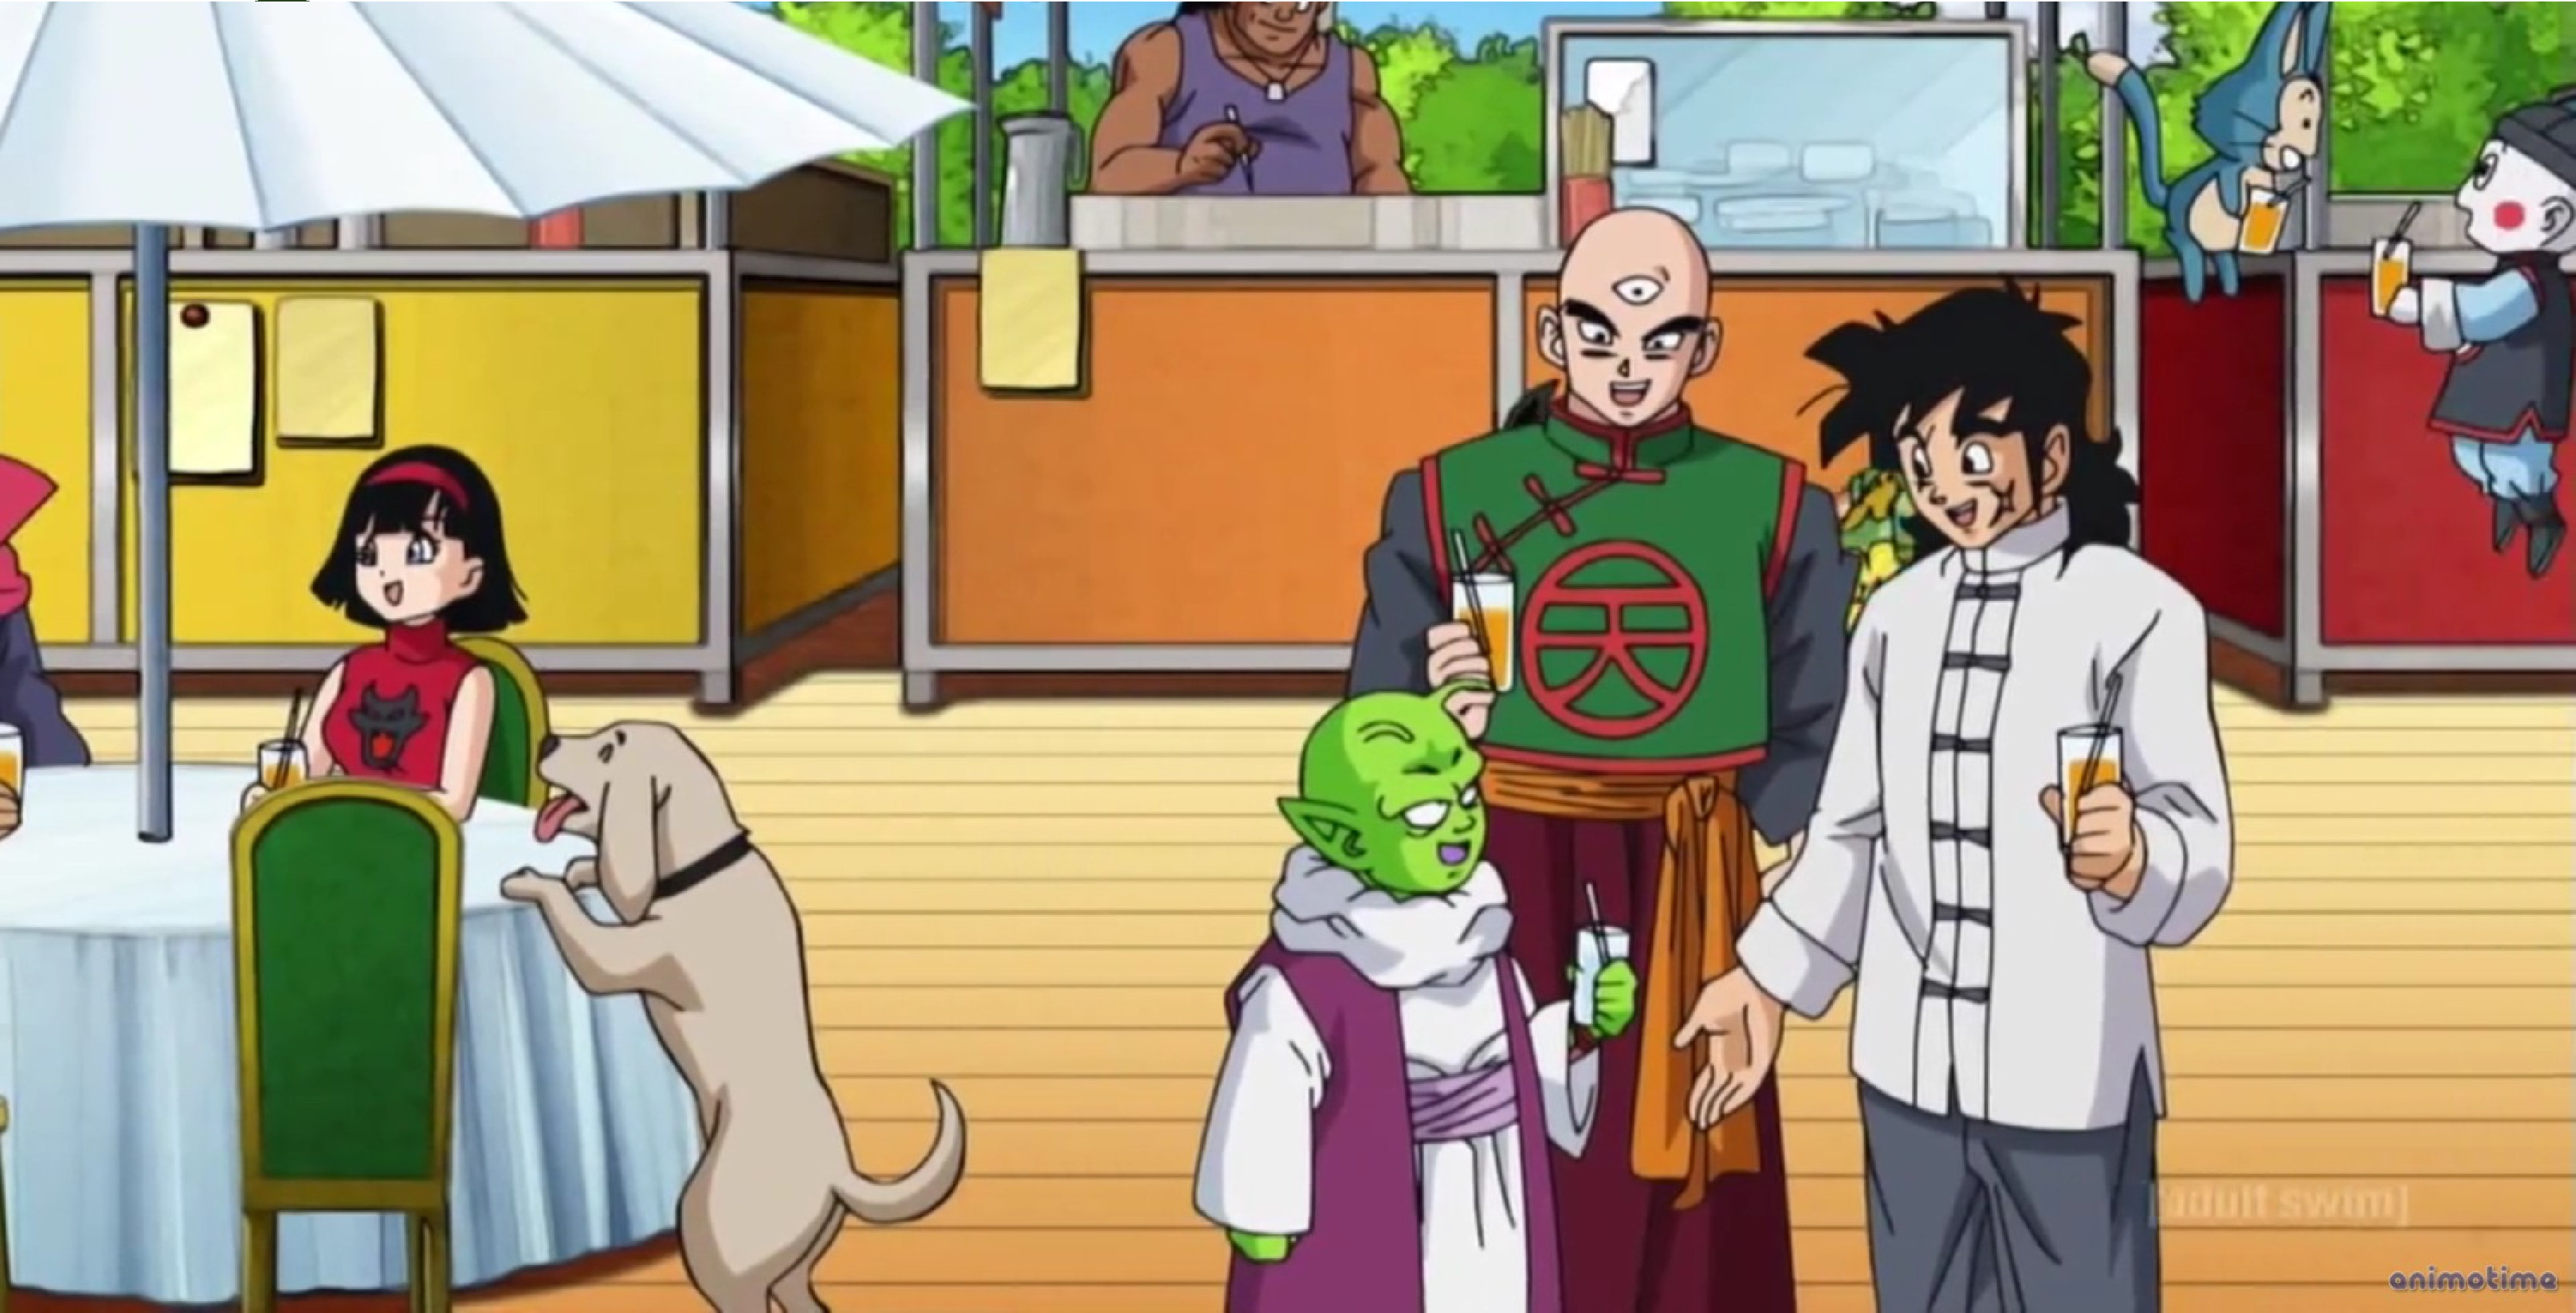 archie tayambong recommends dragonball super episode 3 pic